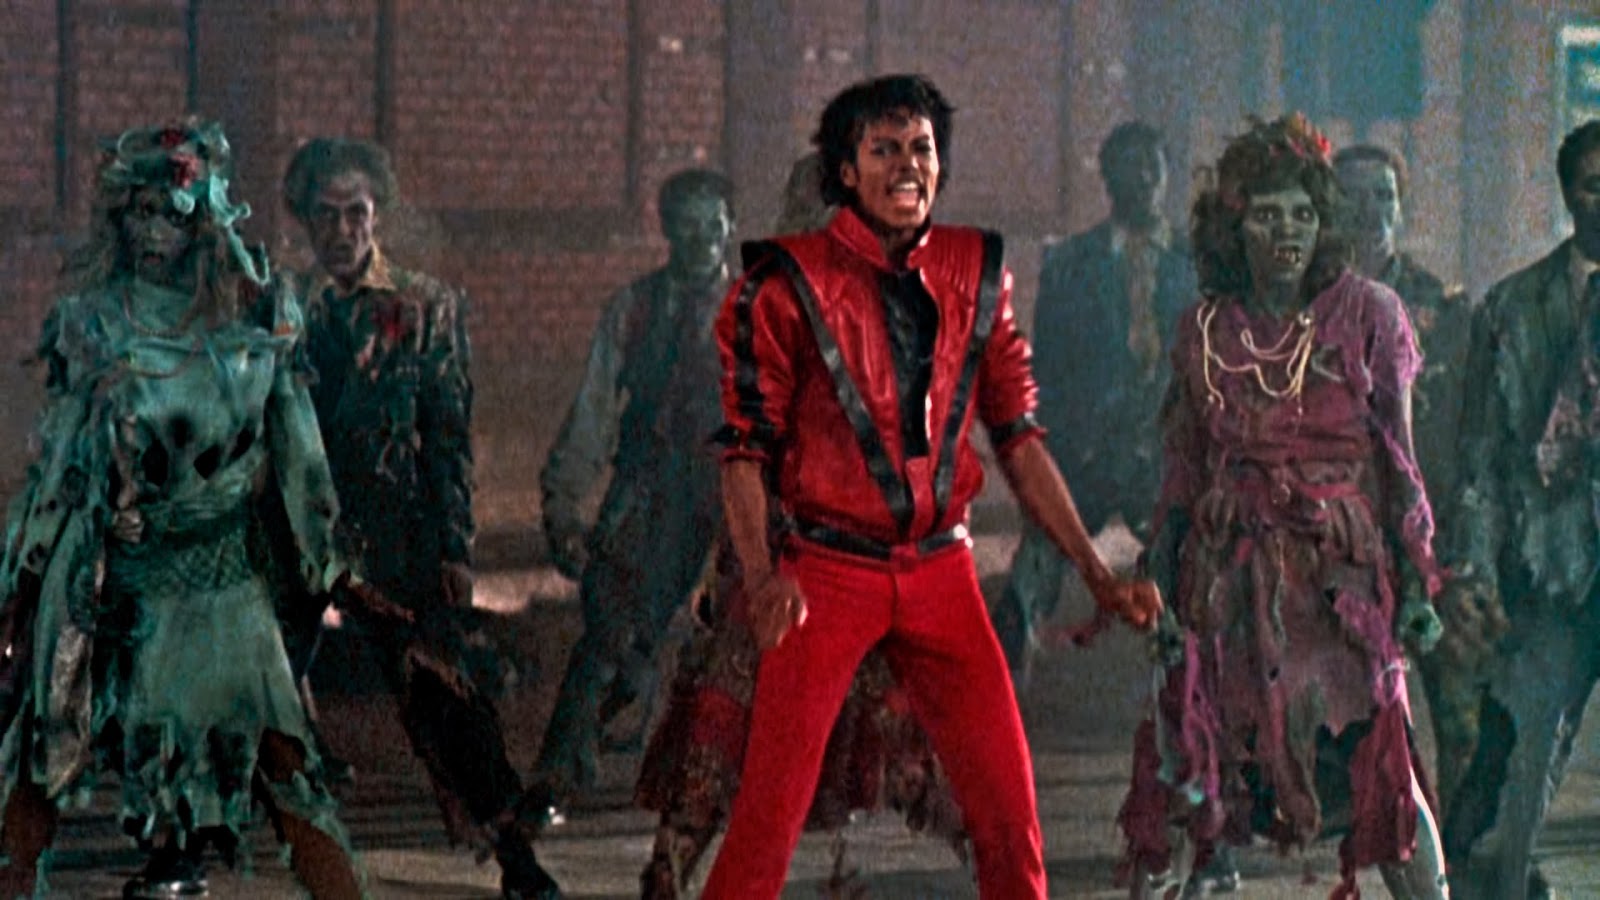 Thriller 3D? – You're going to have to wait until Halloween 2018! | MJVibe